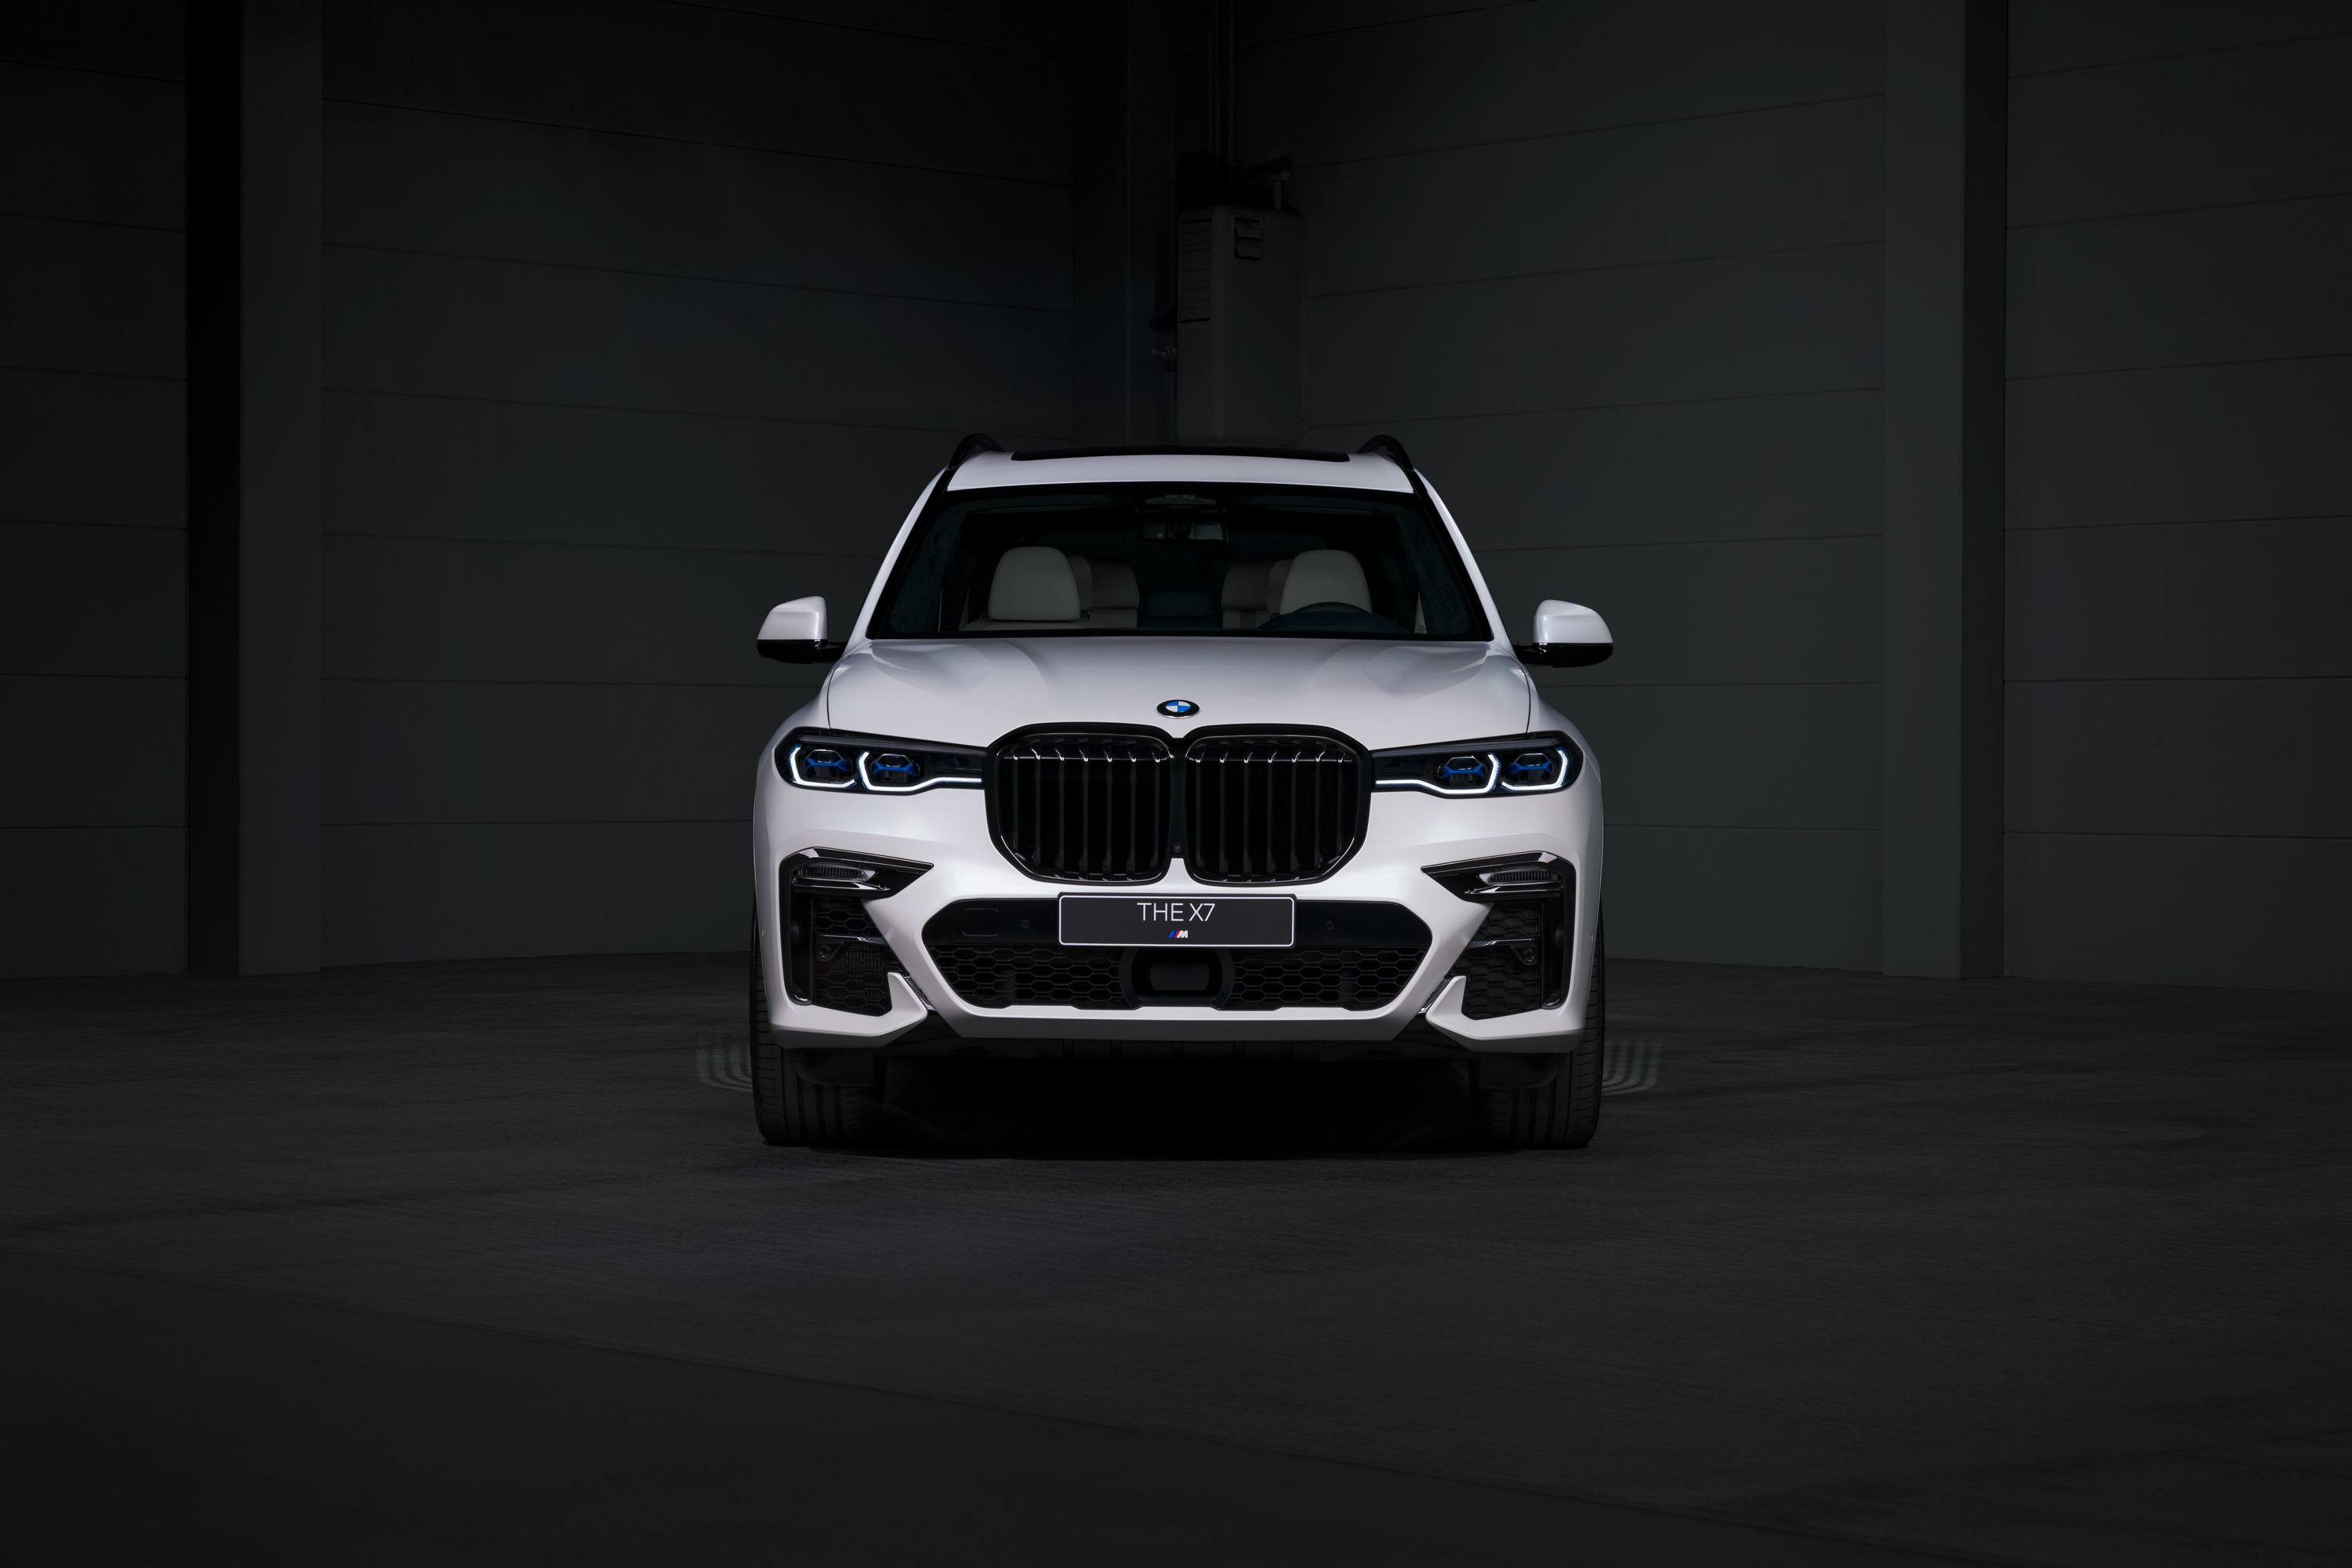 BMW announce the X7 UAE 50th Year Edition to mark the UAE’s Golden Jubilee